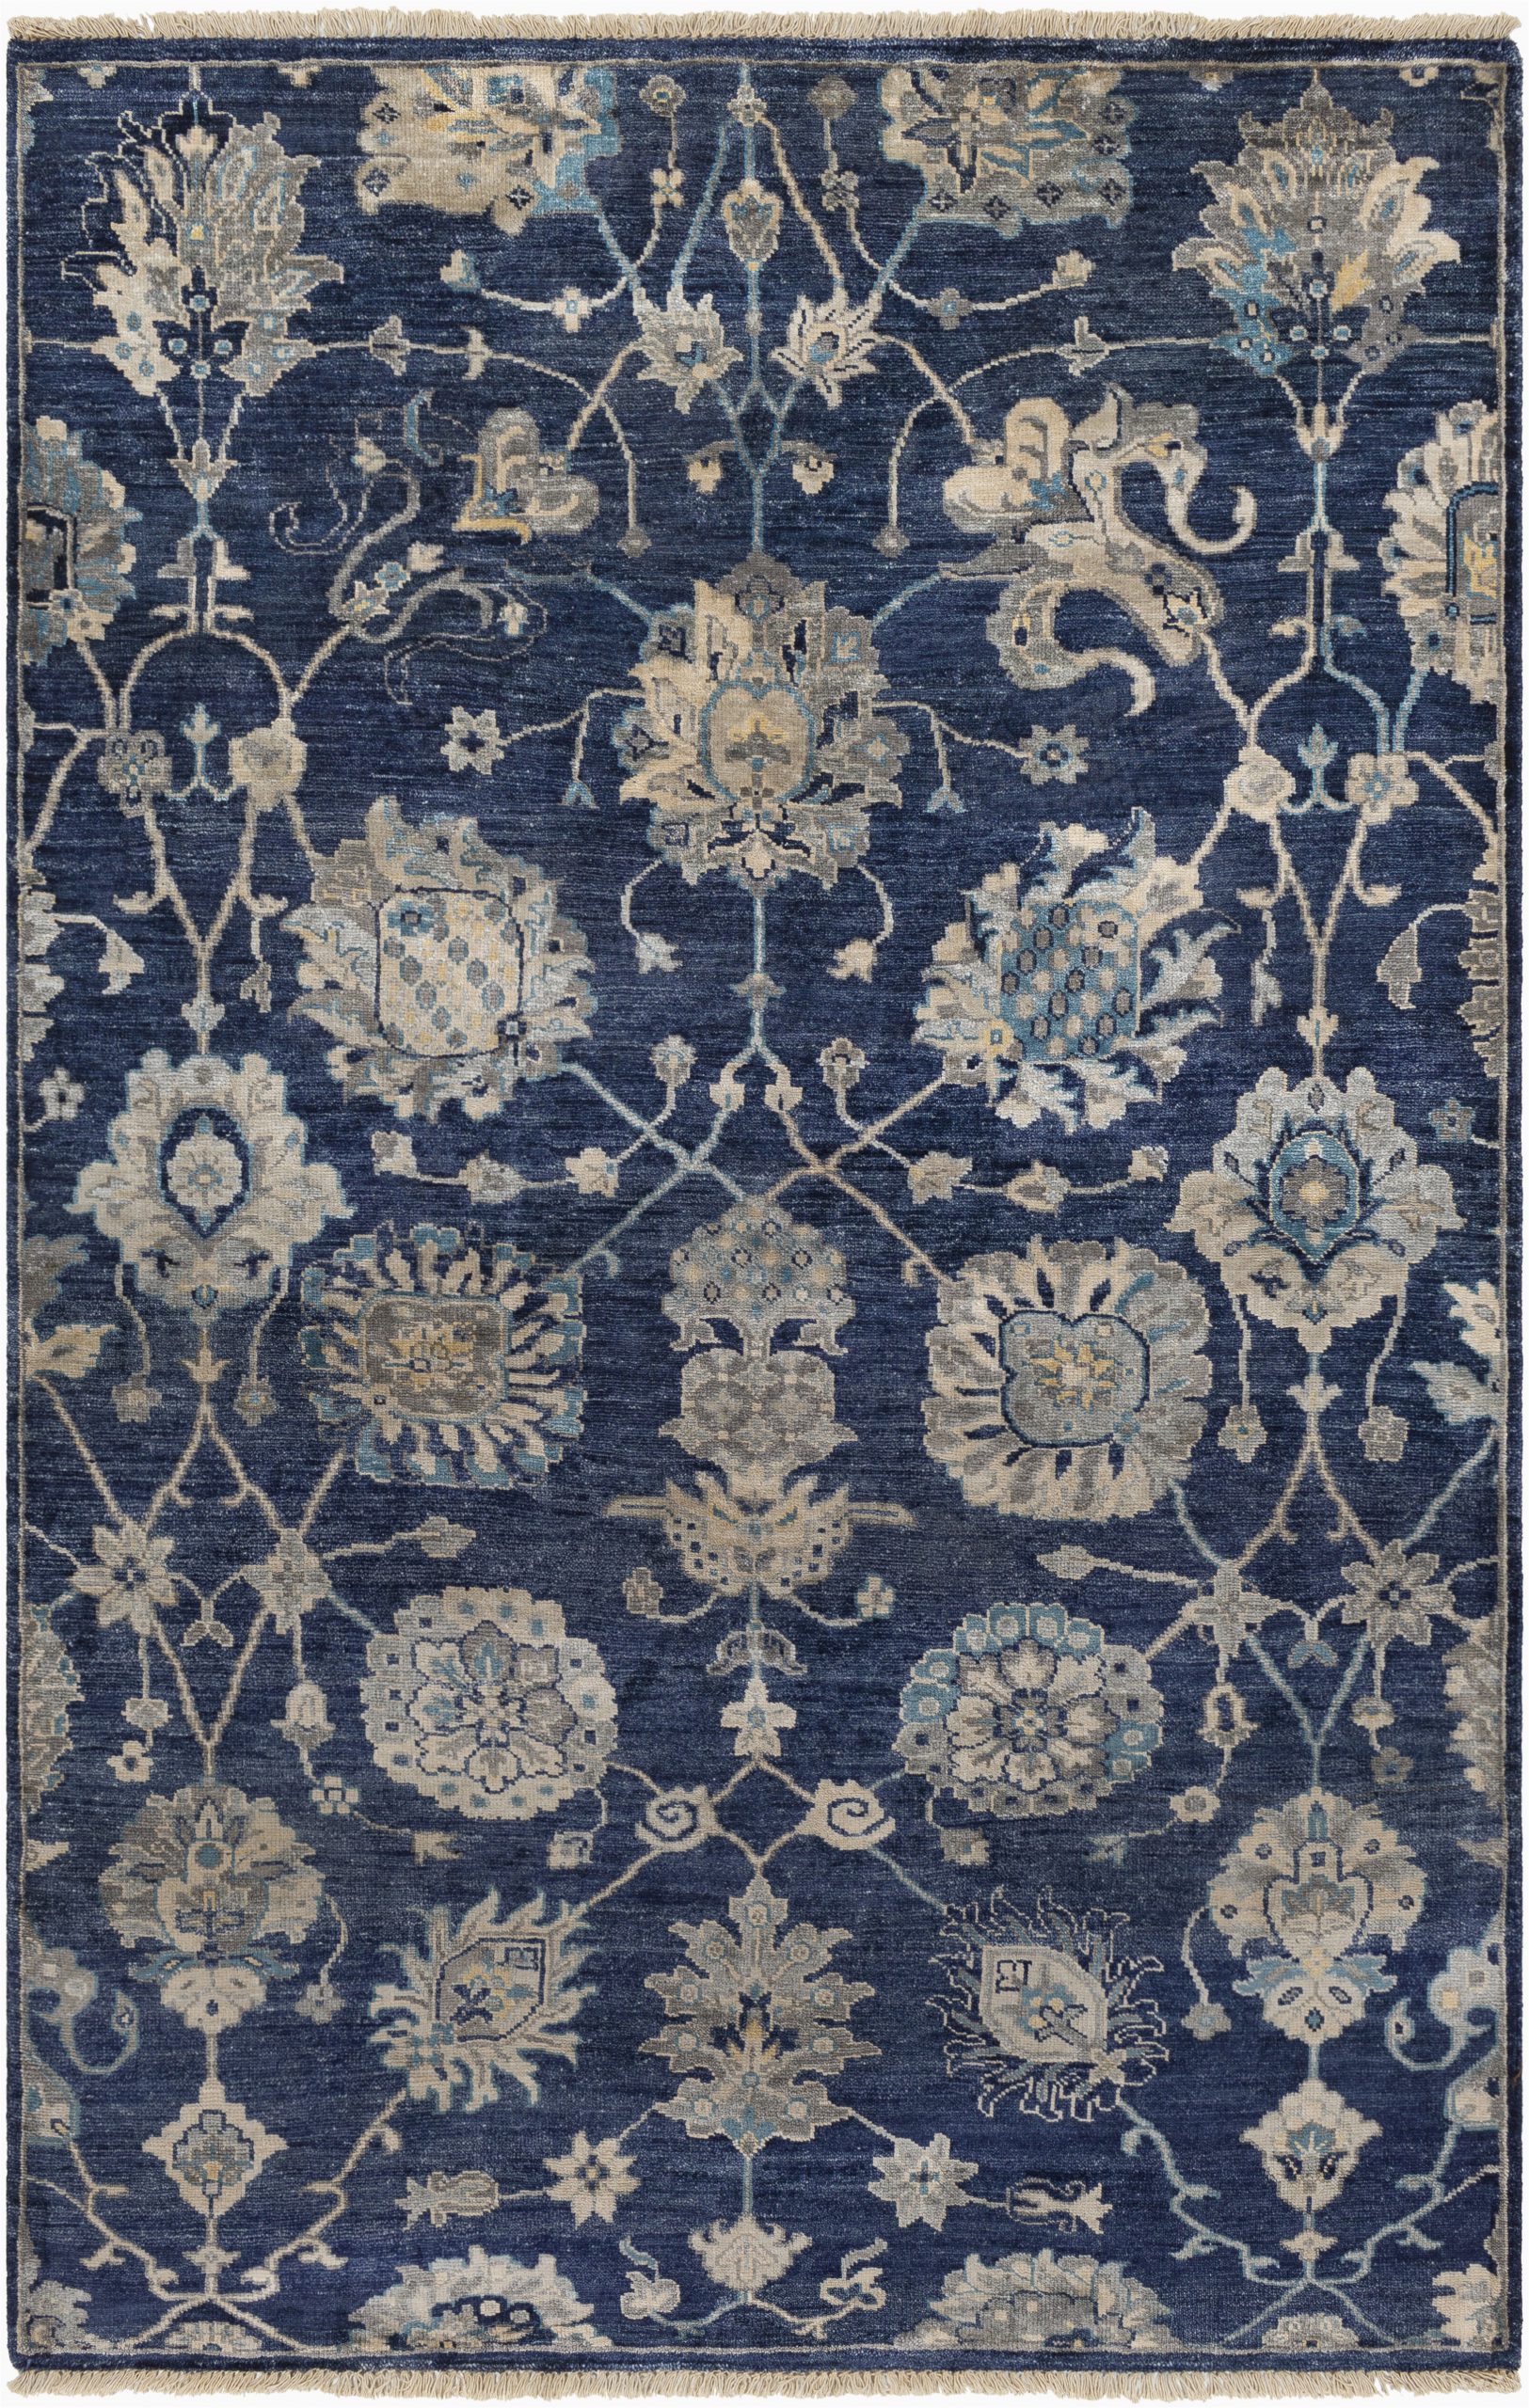 Navy and Taupe area Rug Hesston Floral Hand Knotted Navy Taupe area Rug